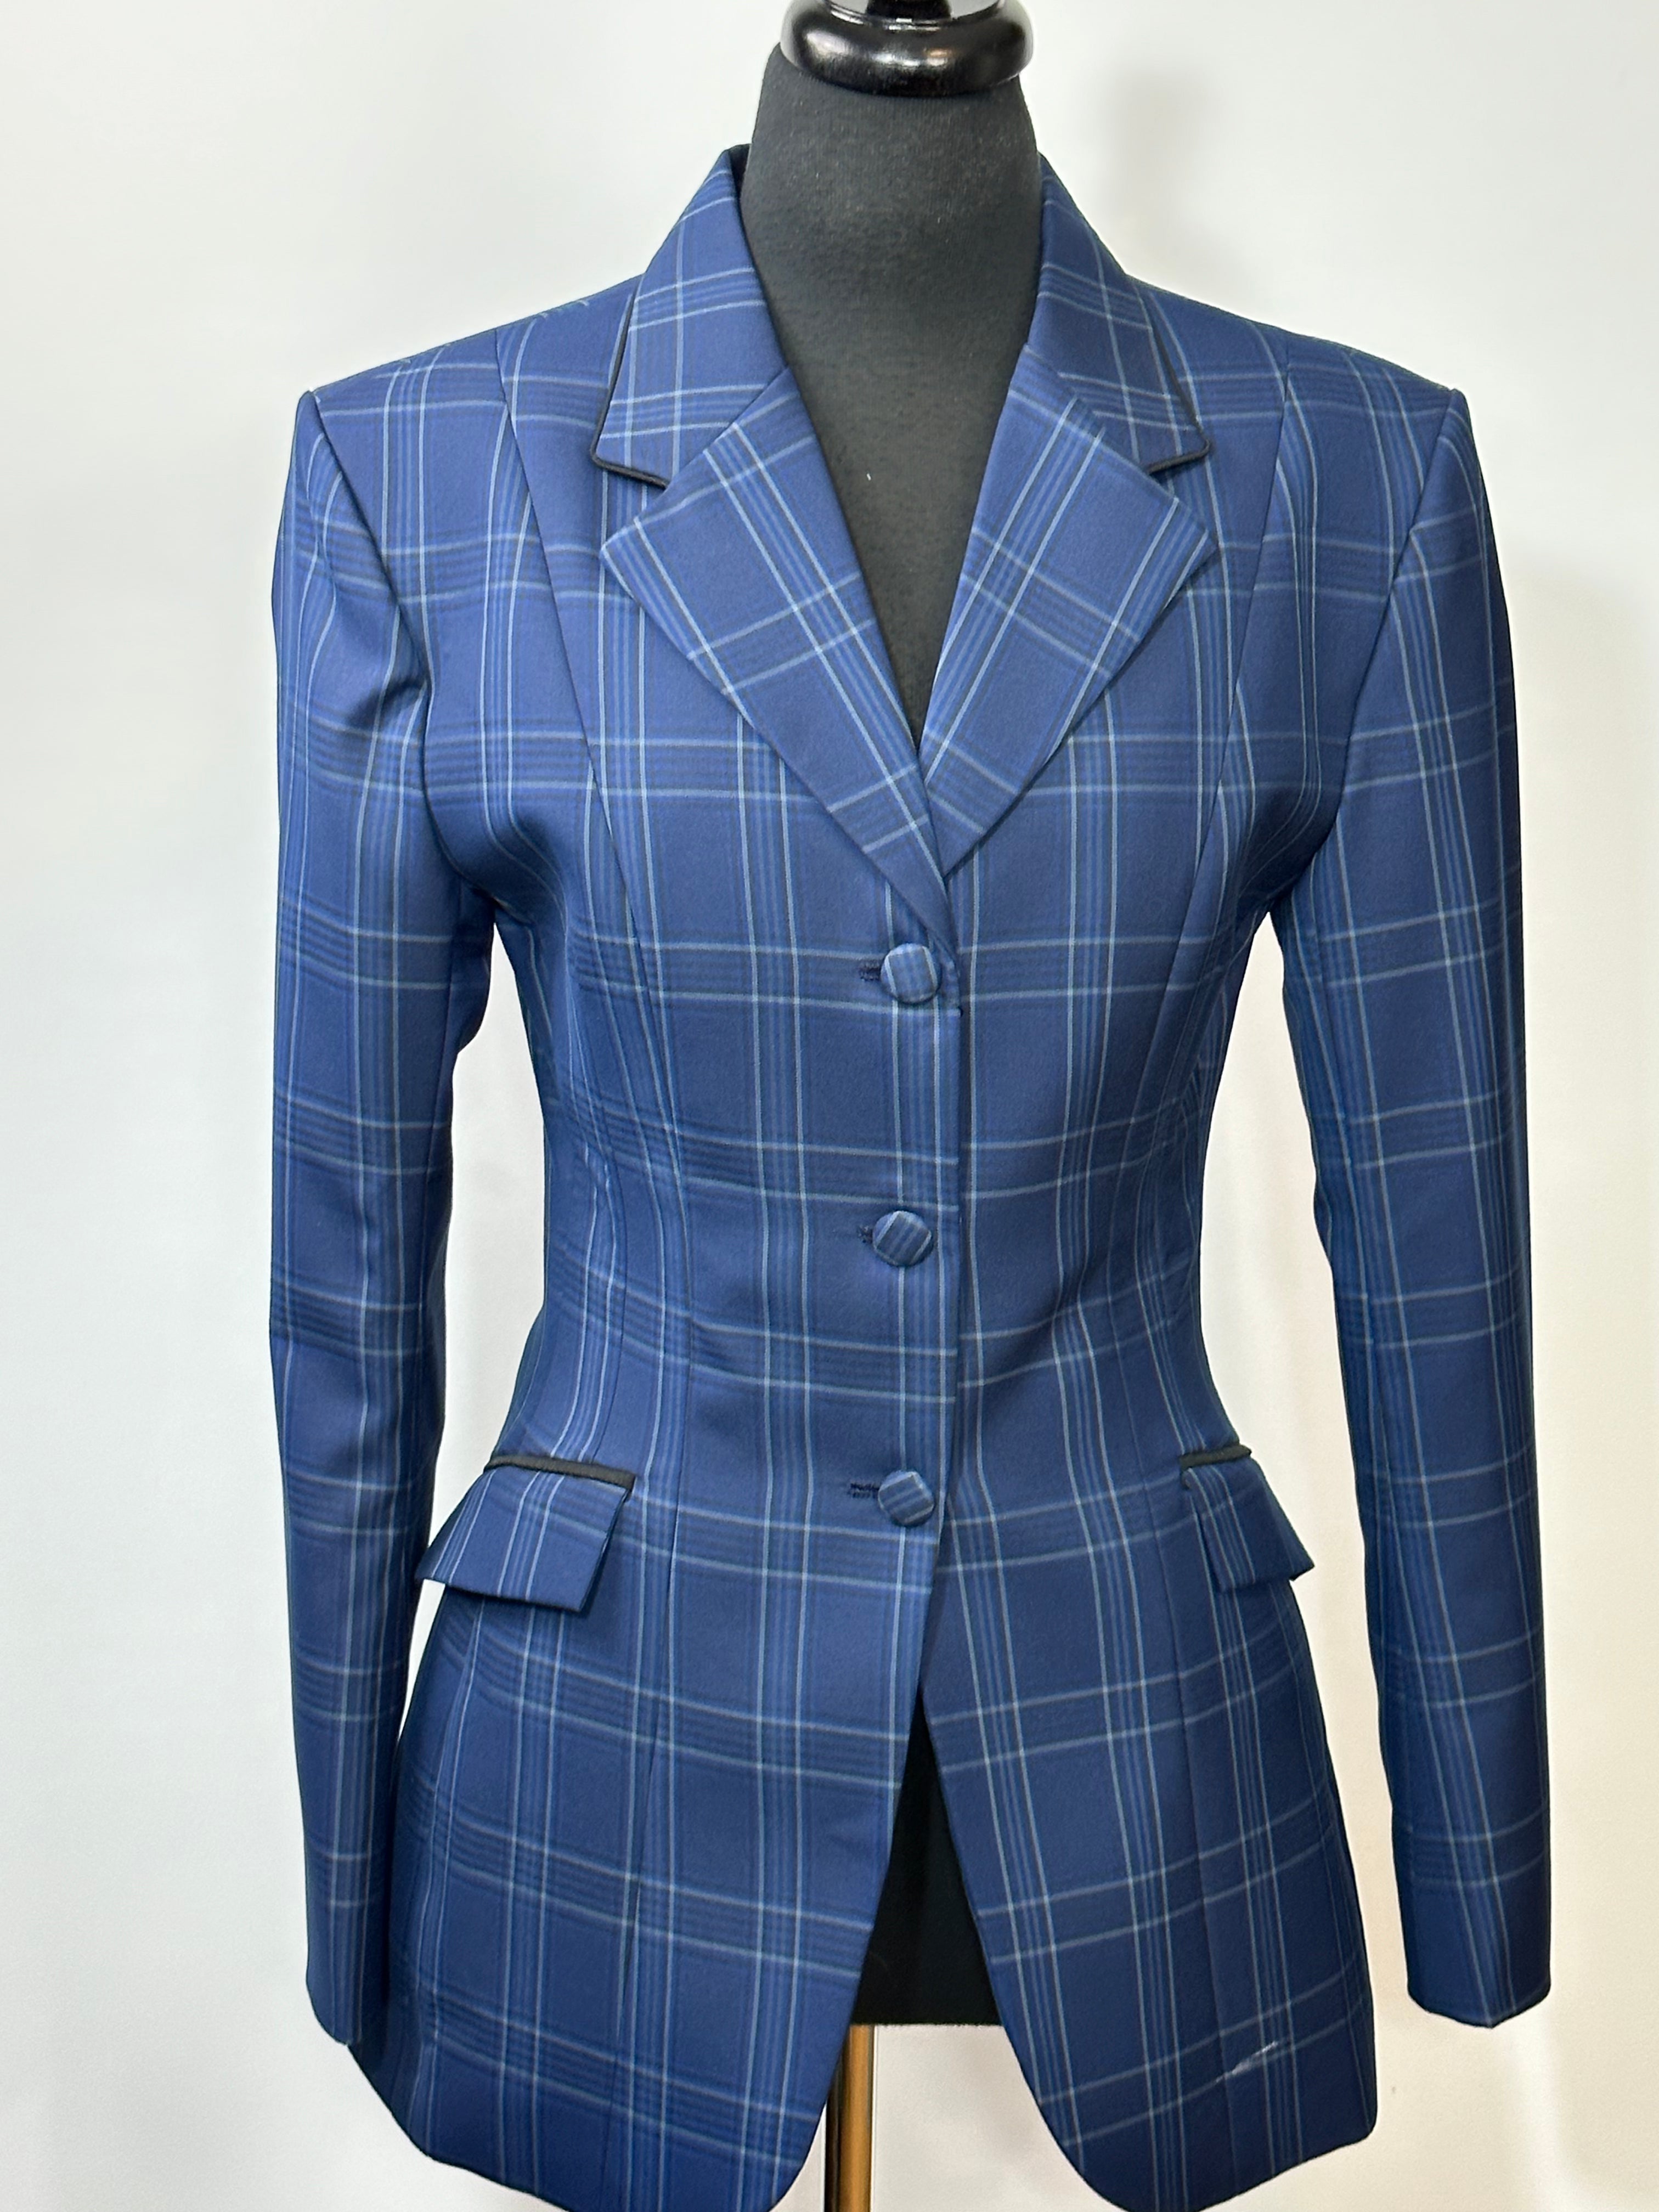 English Show Coat Navy and Black Plaid Fabric Code R191